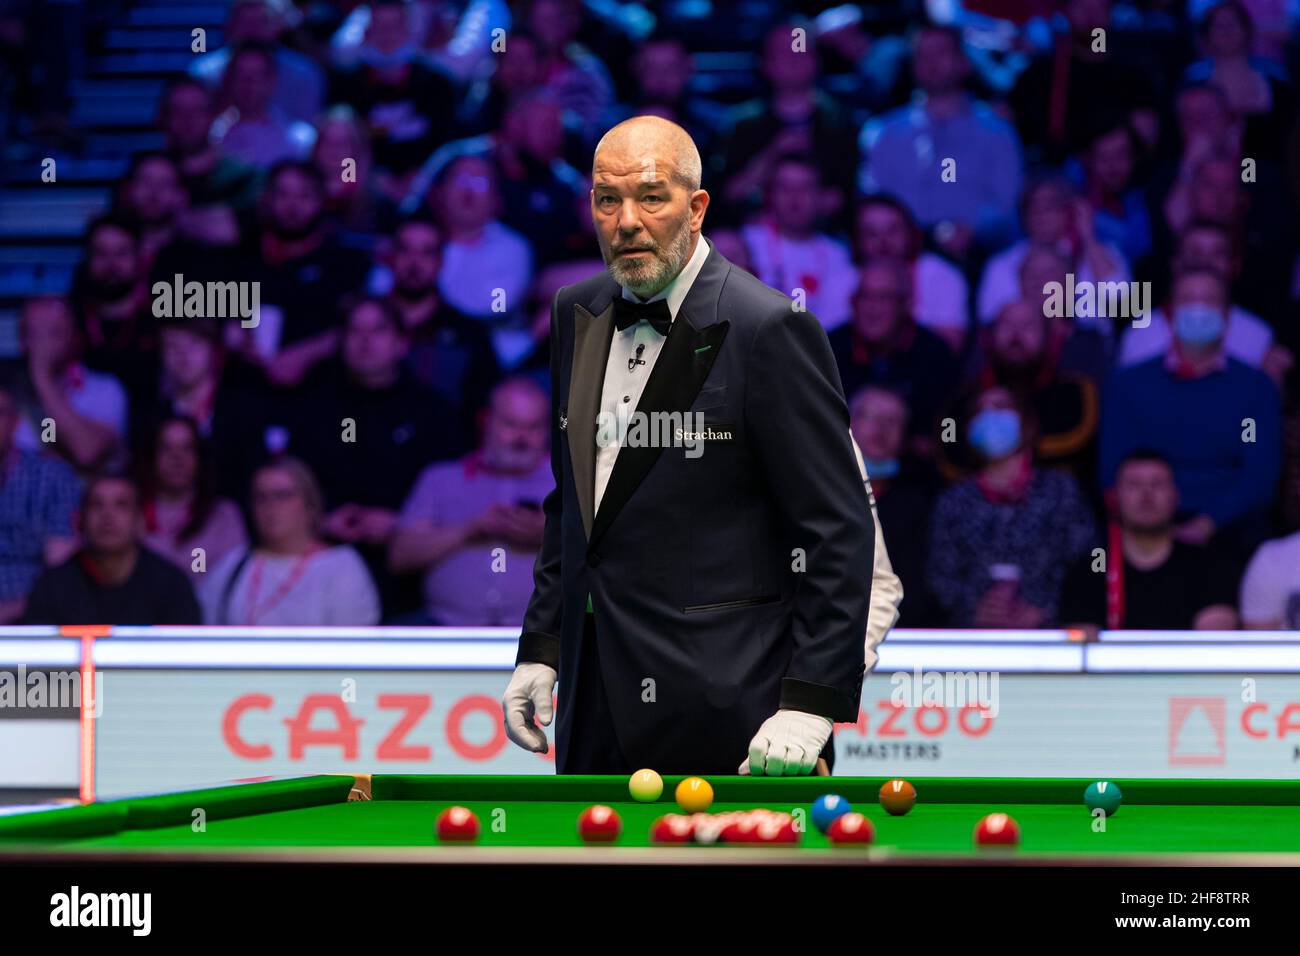 London, UK. 14th Jan, 2022. Barry Hawkins v Mark Selby during the 2022 Cazoo Master at Alexandra Palace on Friday, January 14, 2022 in LONDON ENGLAND. Credit: Taka G Wu/Alamy Live News Stock Photo